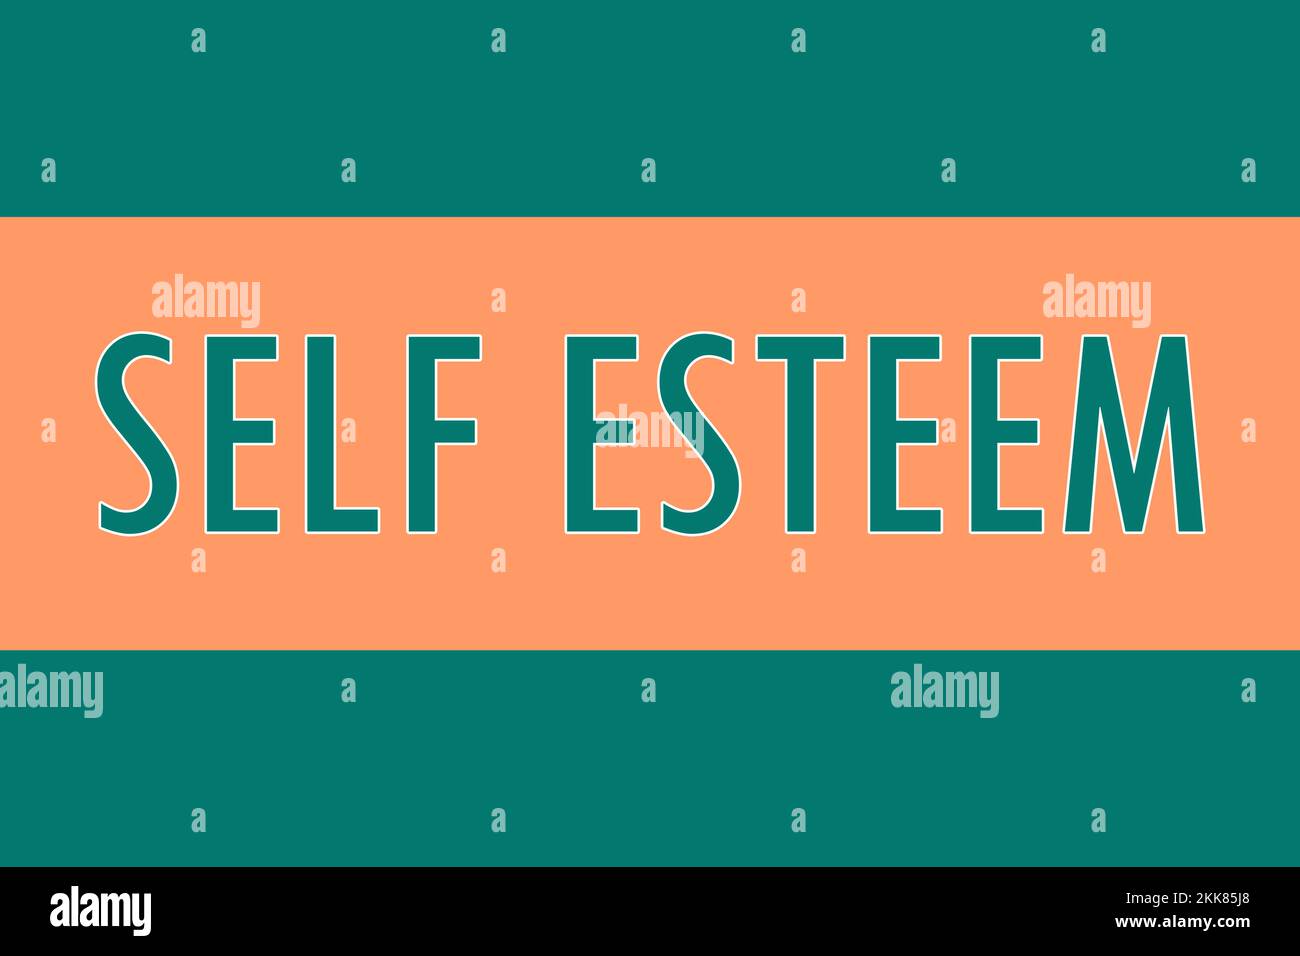 Self esteem, logo. Colorful typography banner with word. Text caption, art lettering, creative colorful font. Rubric concept. Minimalistic design Stock Photo